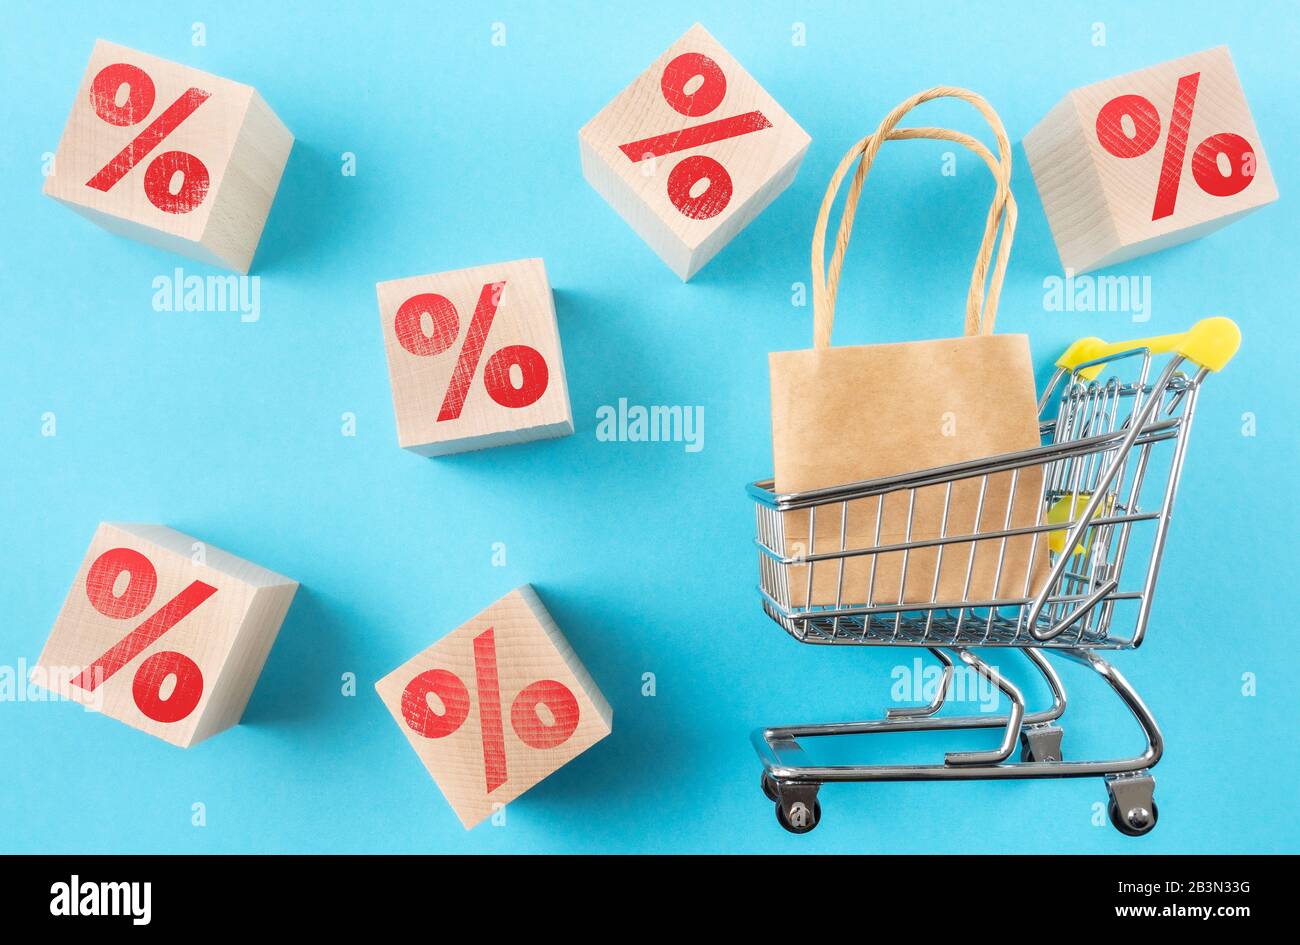 shopping cart with shopping bag and red percent sign on wooden cubes against blue background, retail sale and discount concept Stock Photo